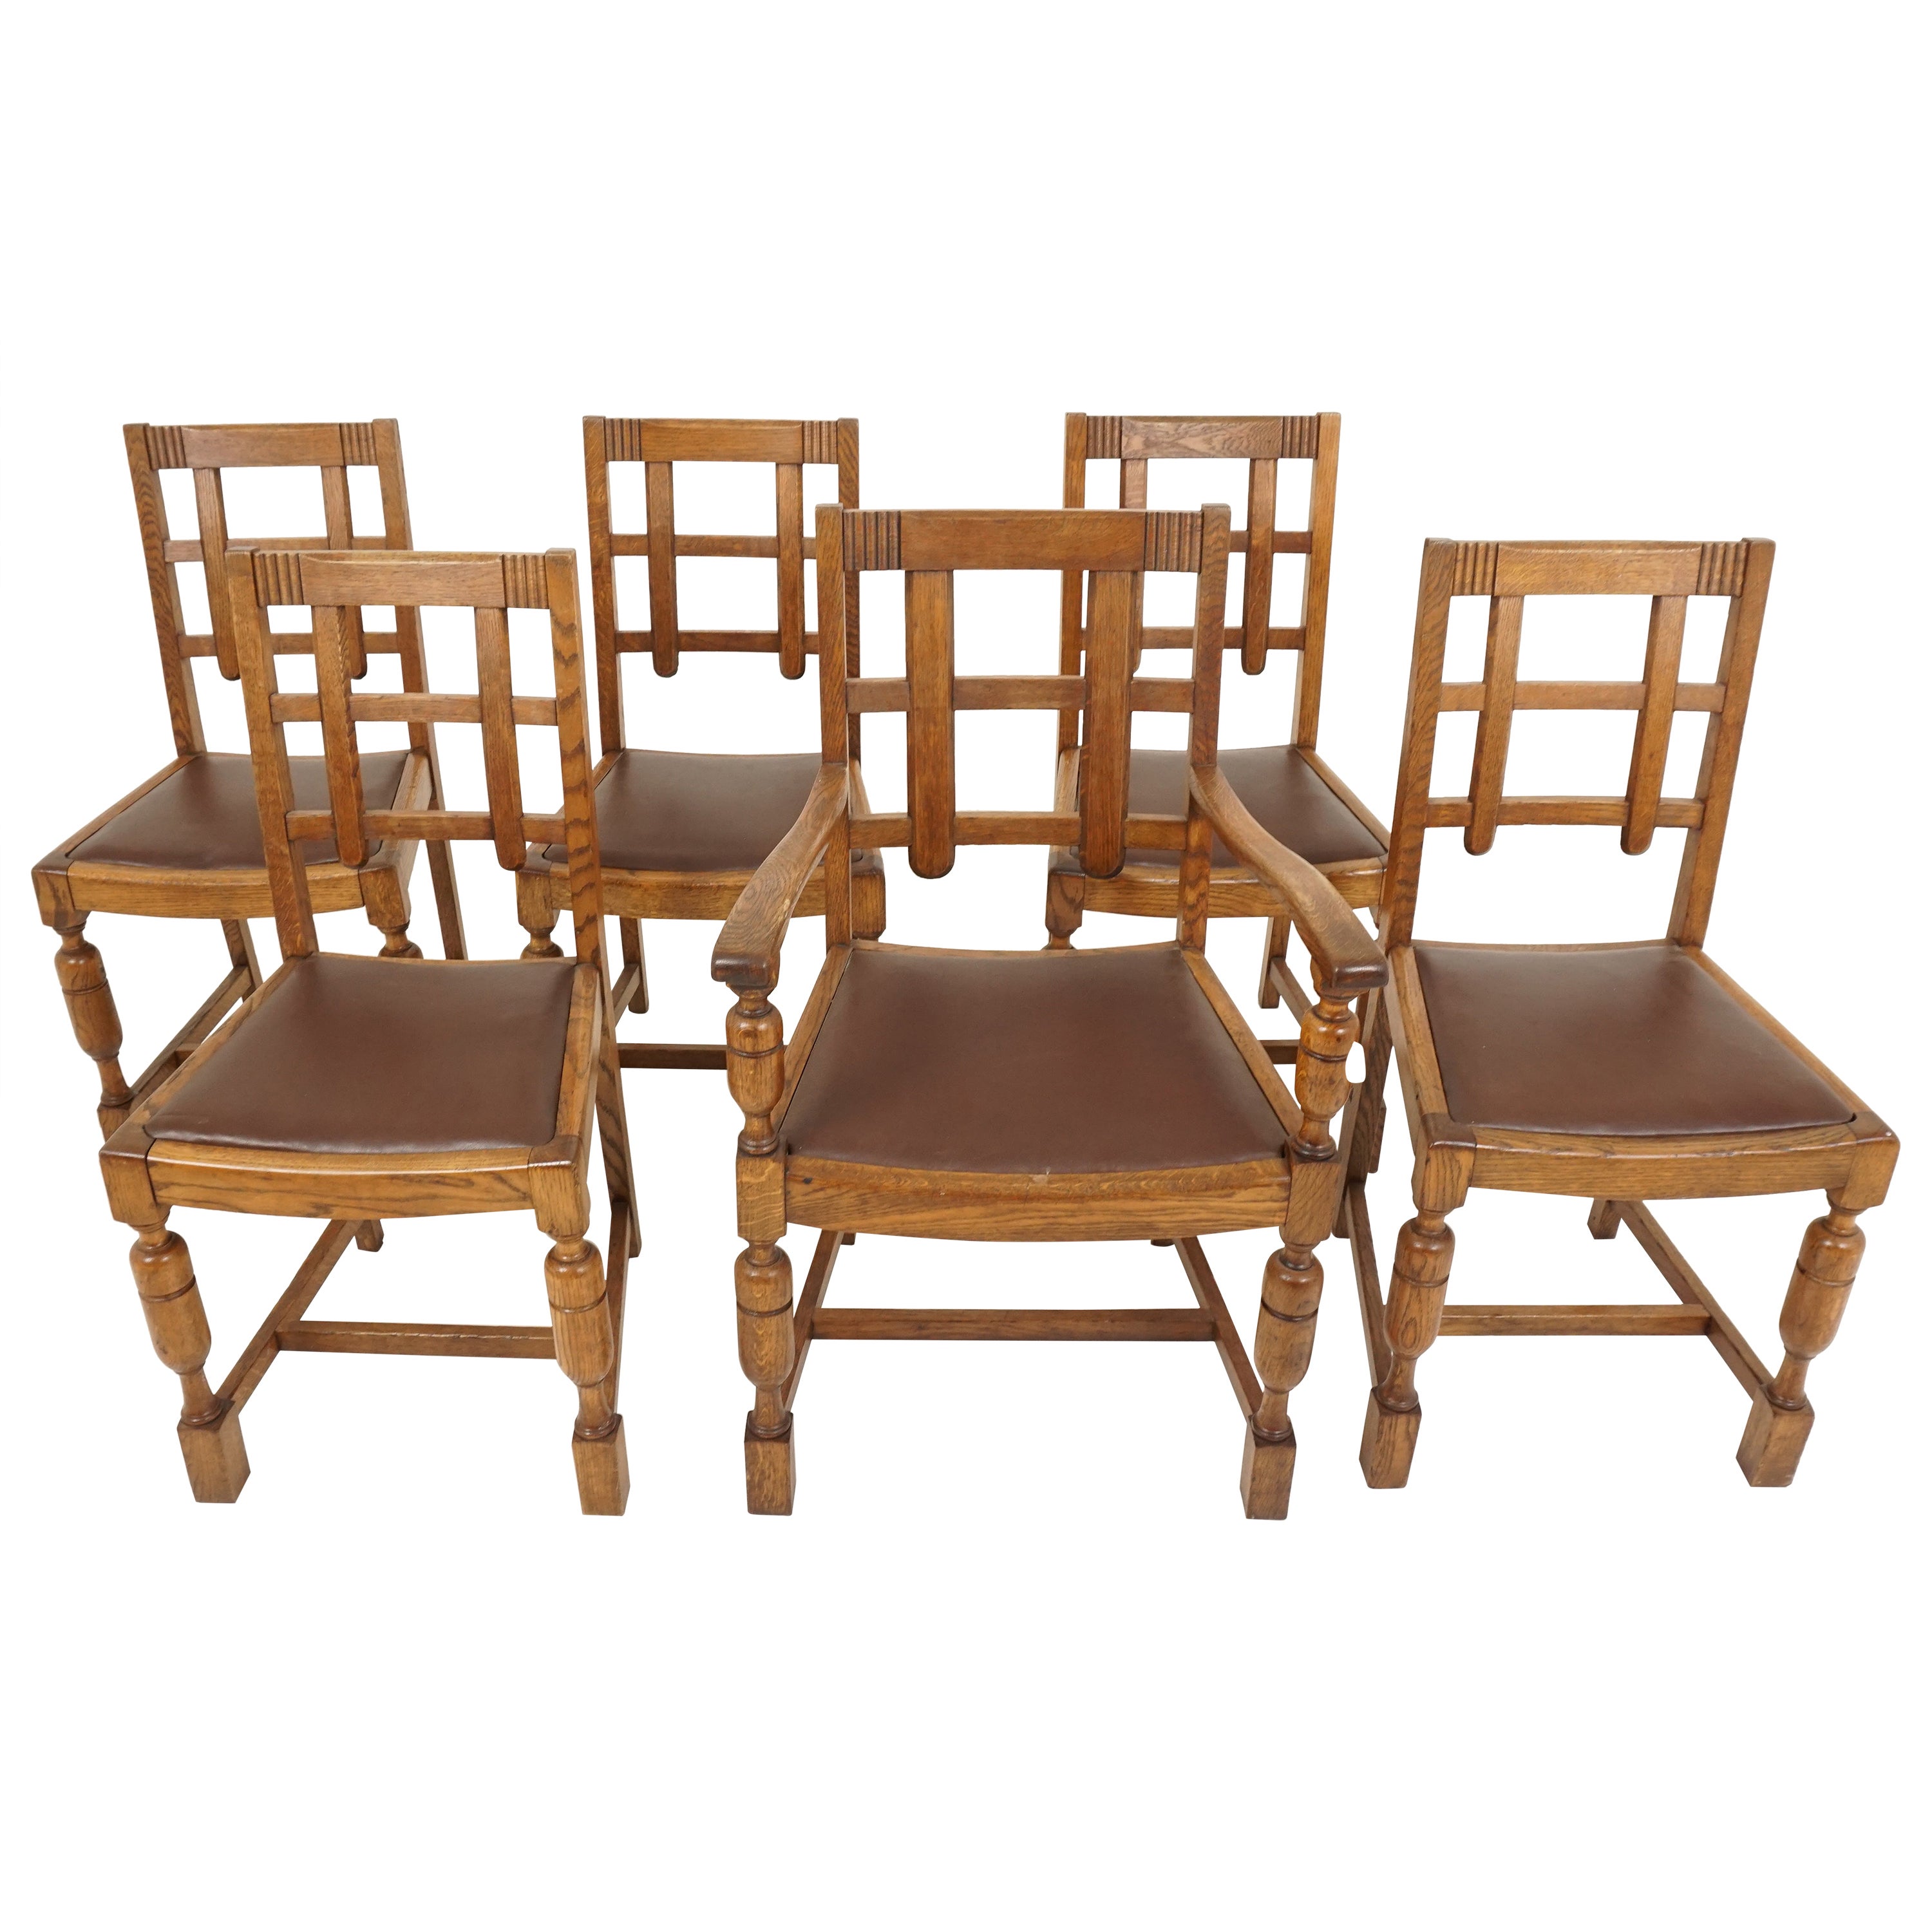 6 Antique Dining Chairs Art Deco 5 1, Antique Dining Chairs Atlanta